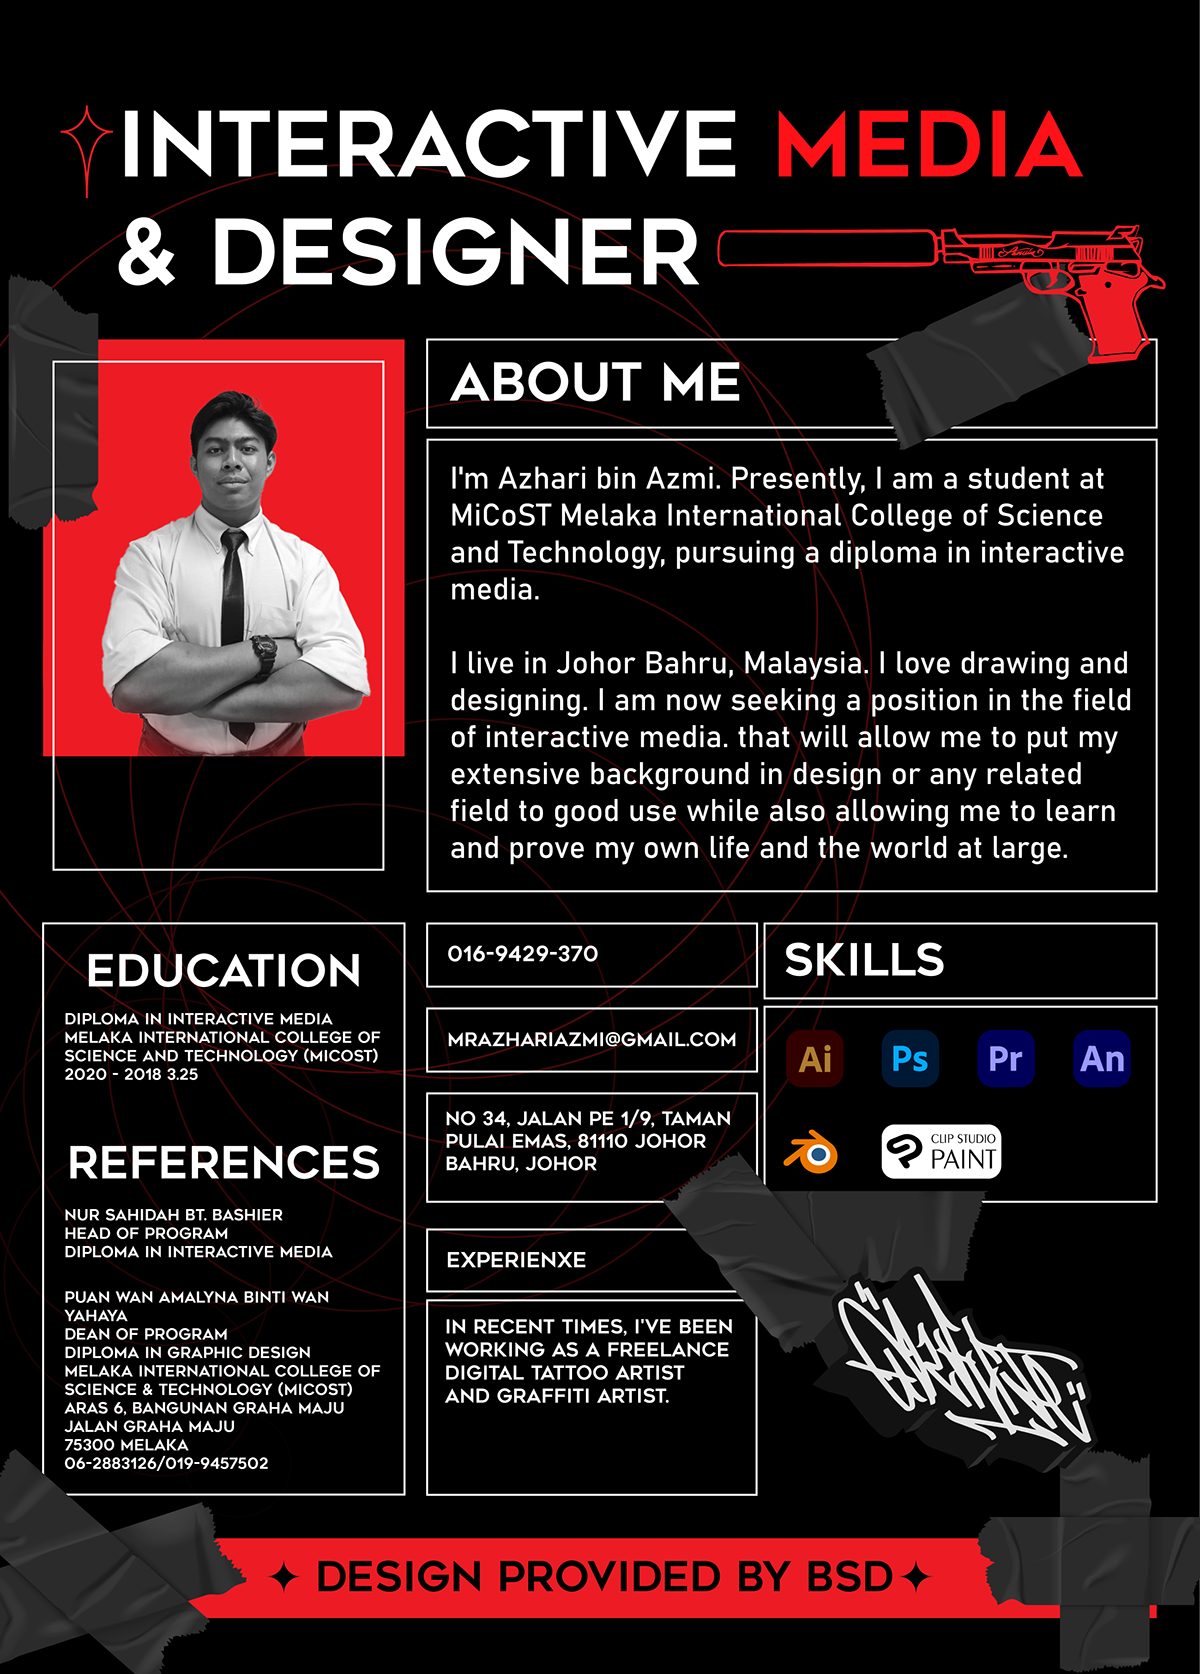 resume about me as an Interactive Media and a Designer.